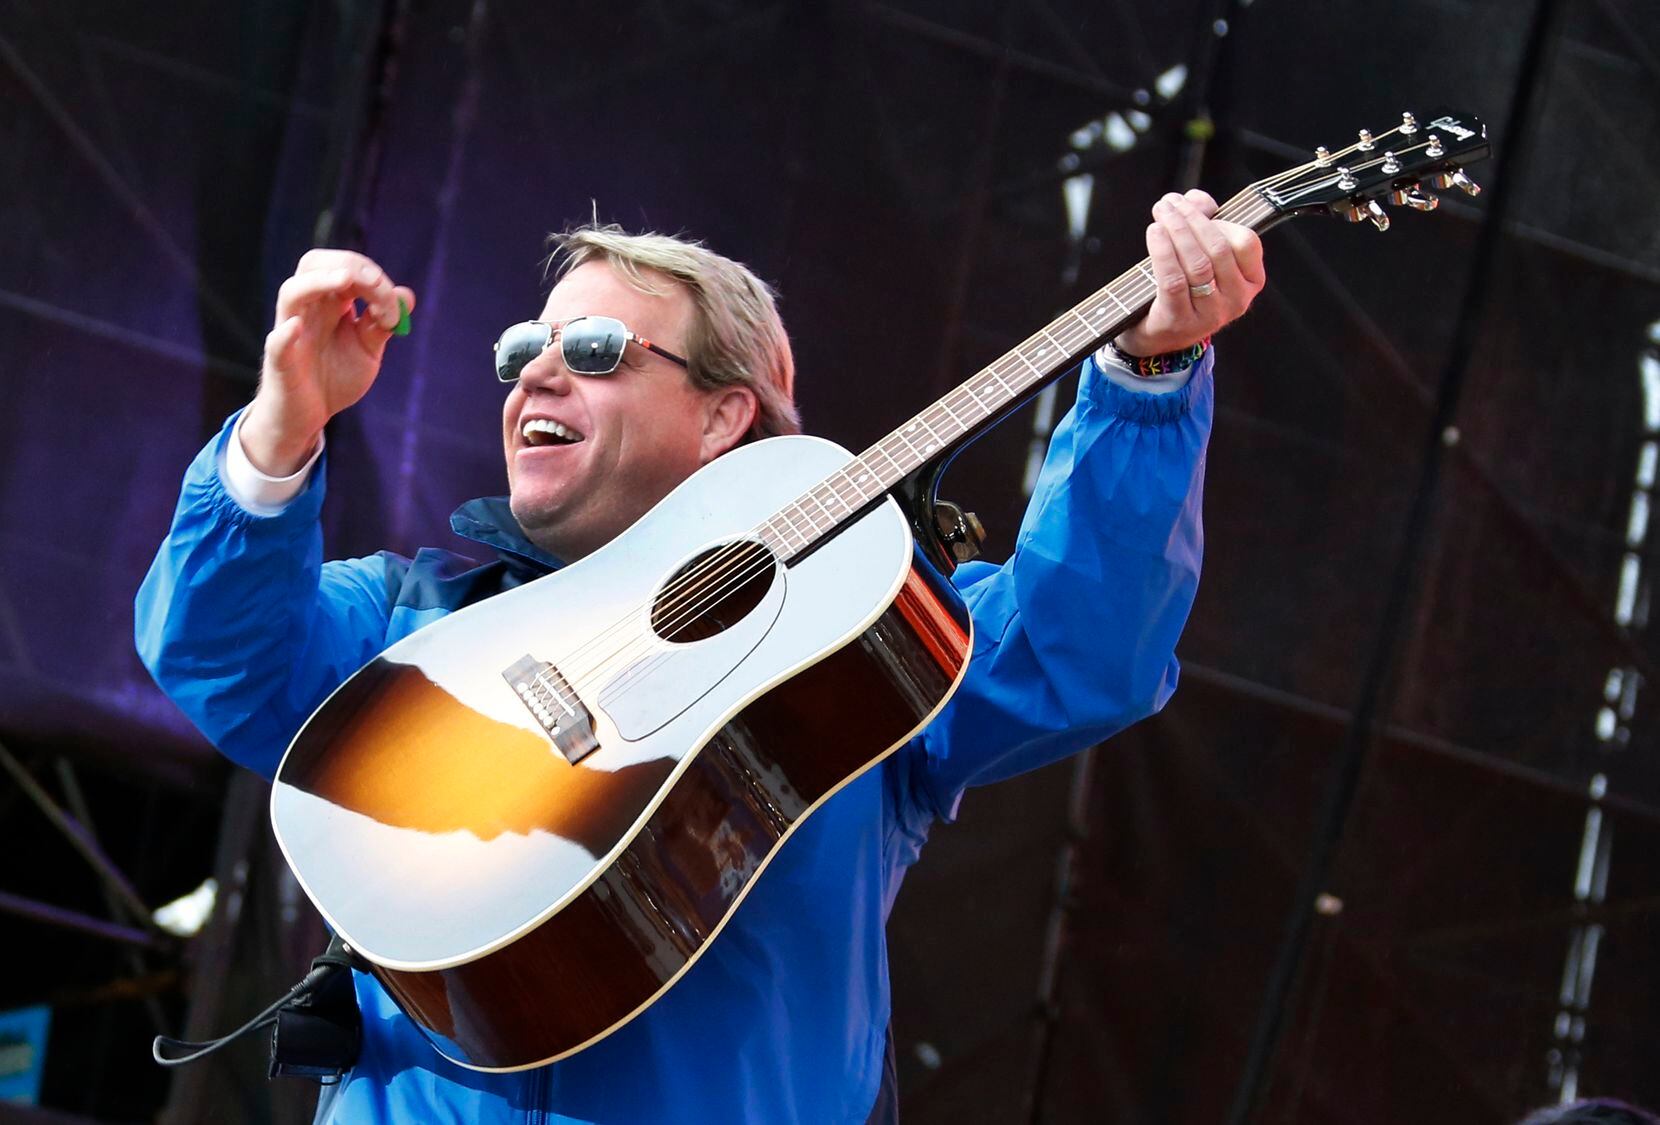 Pat Green performed during the March Madness Music Festival in Dallas on April 6, 2014.